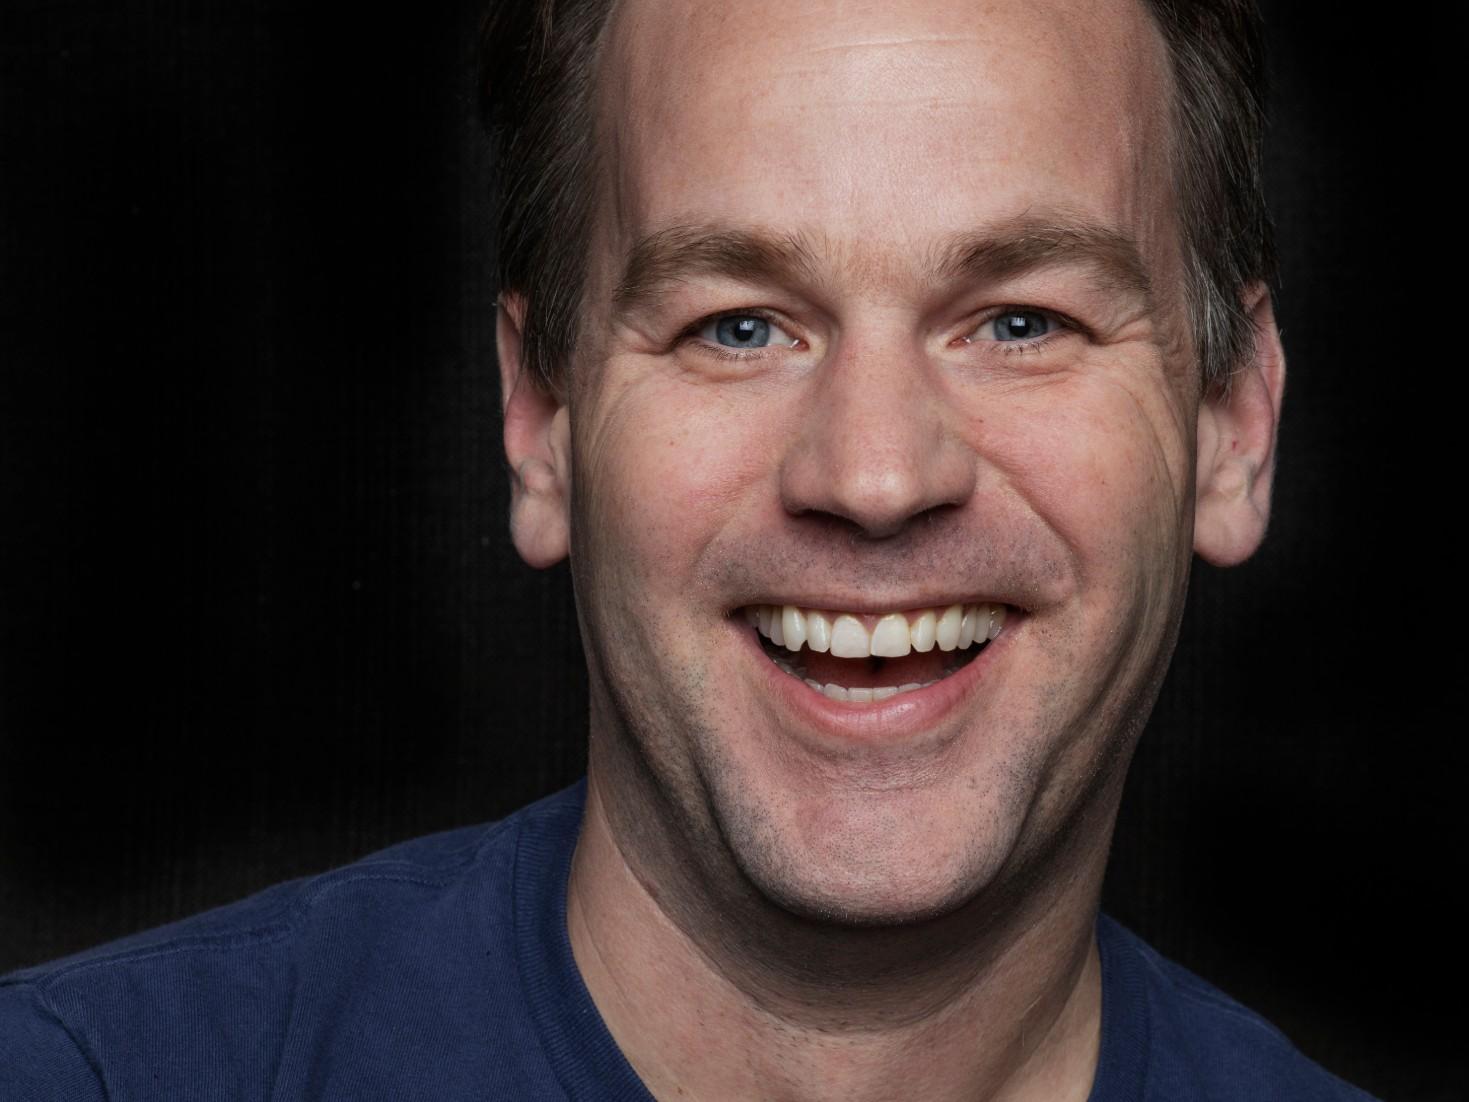 Mike Birbiglia Imagines His Own Death The New Yorker Radio Hour